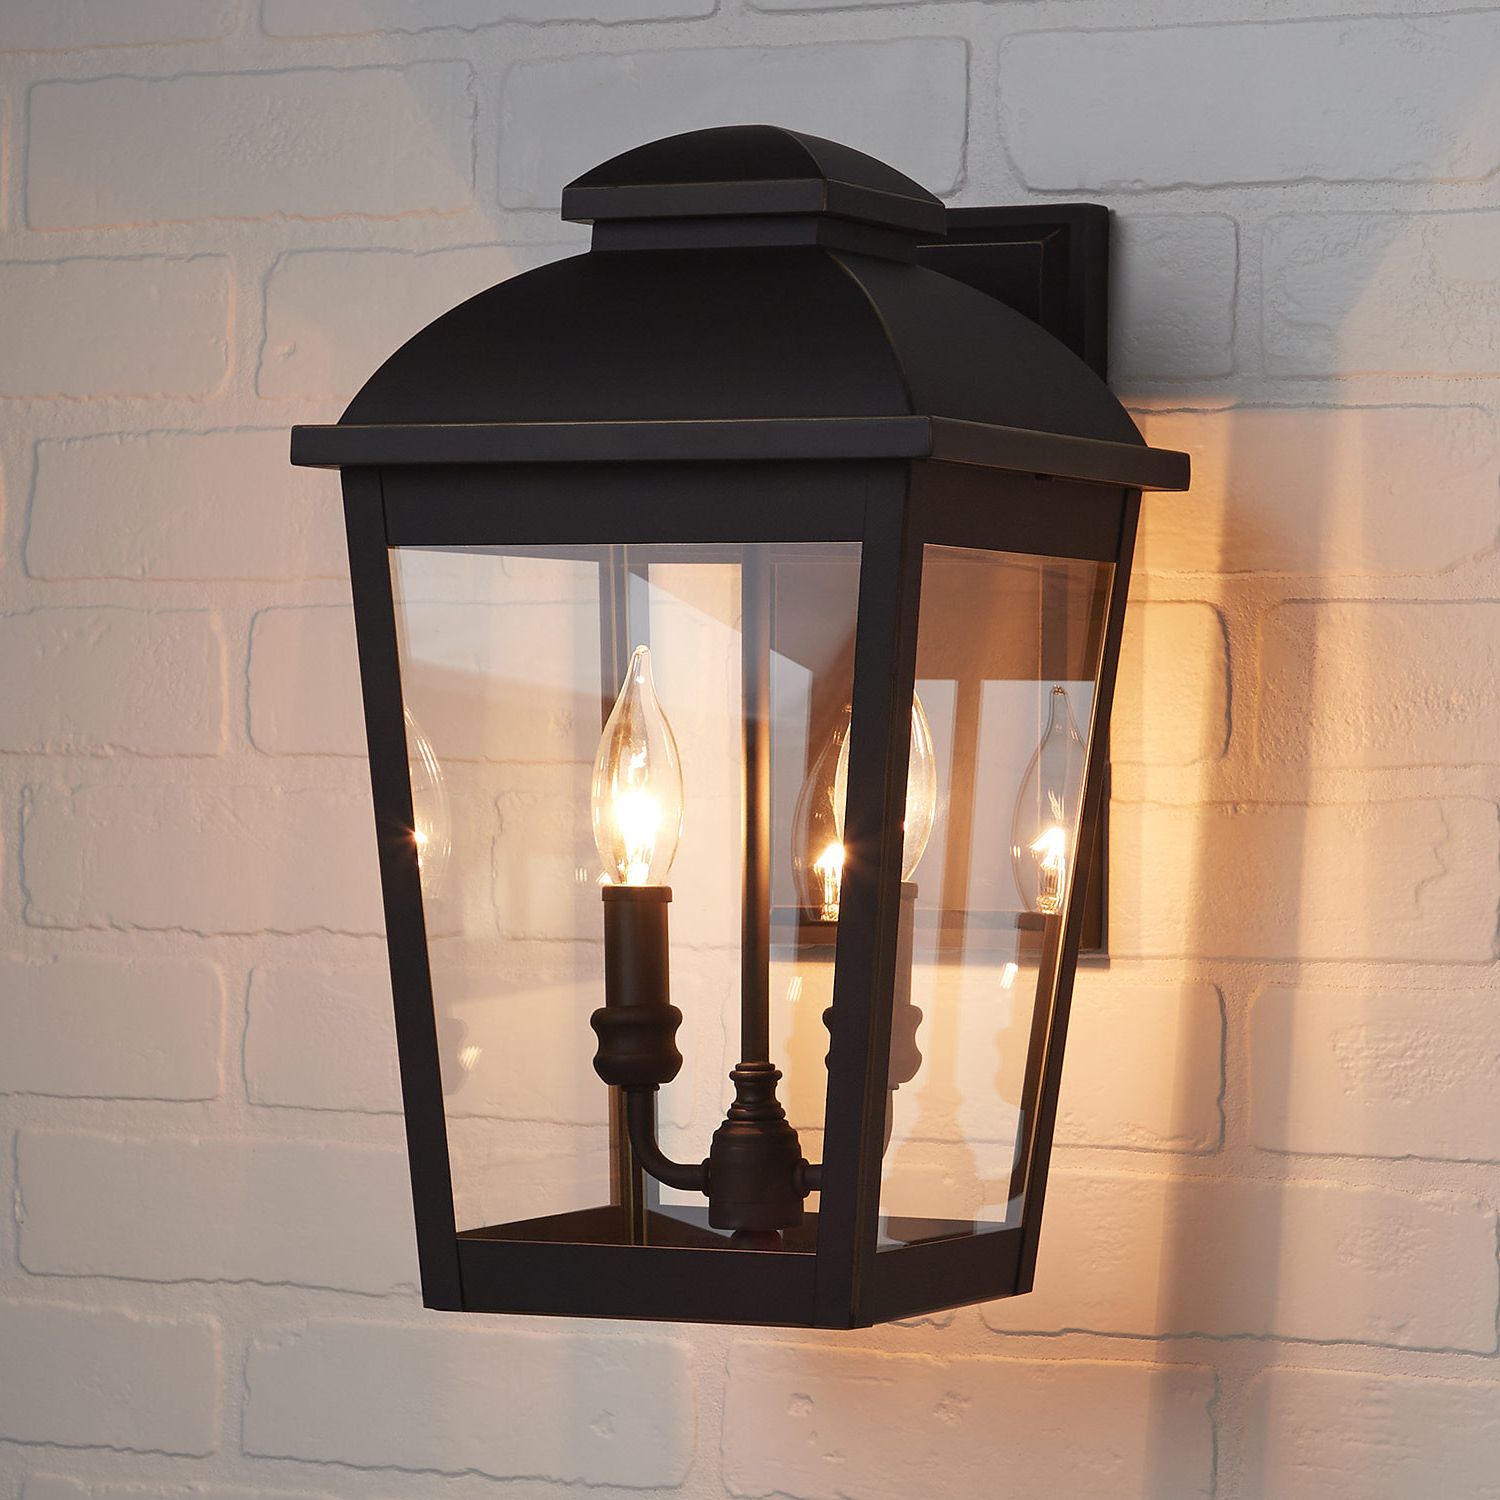 Newest Jaceton Black Outdoor Wall Lanterns Pertaining To Goodwin 2 Light Outdoor Entrance Wall Sconce – Oil Rubbed (View 2 of 20)